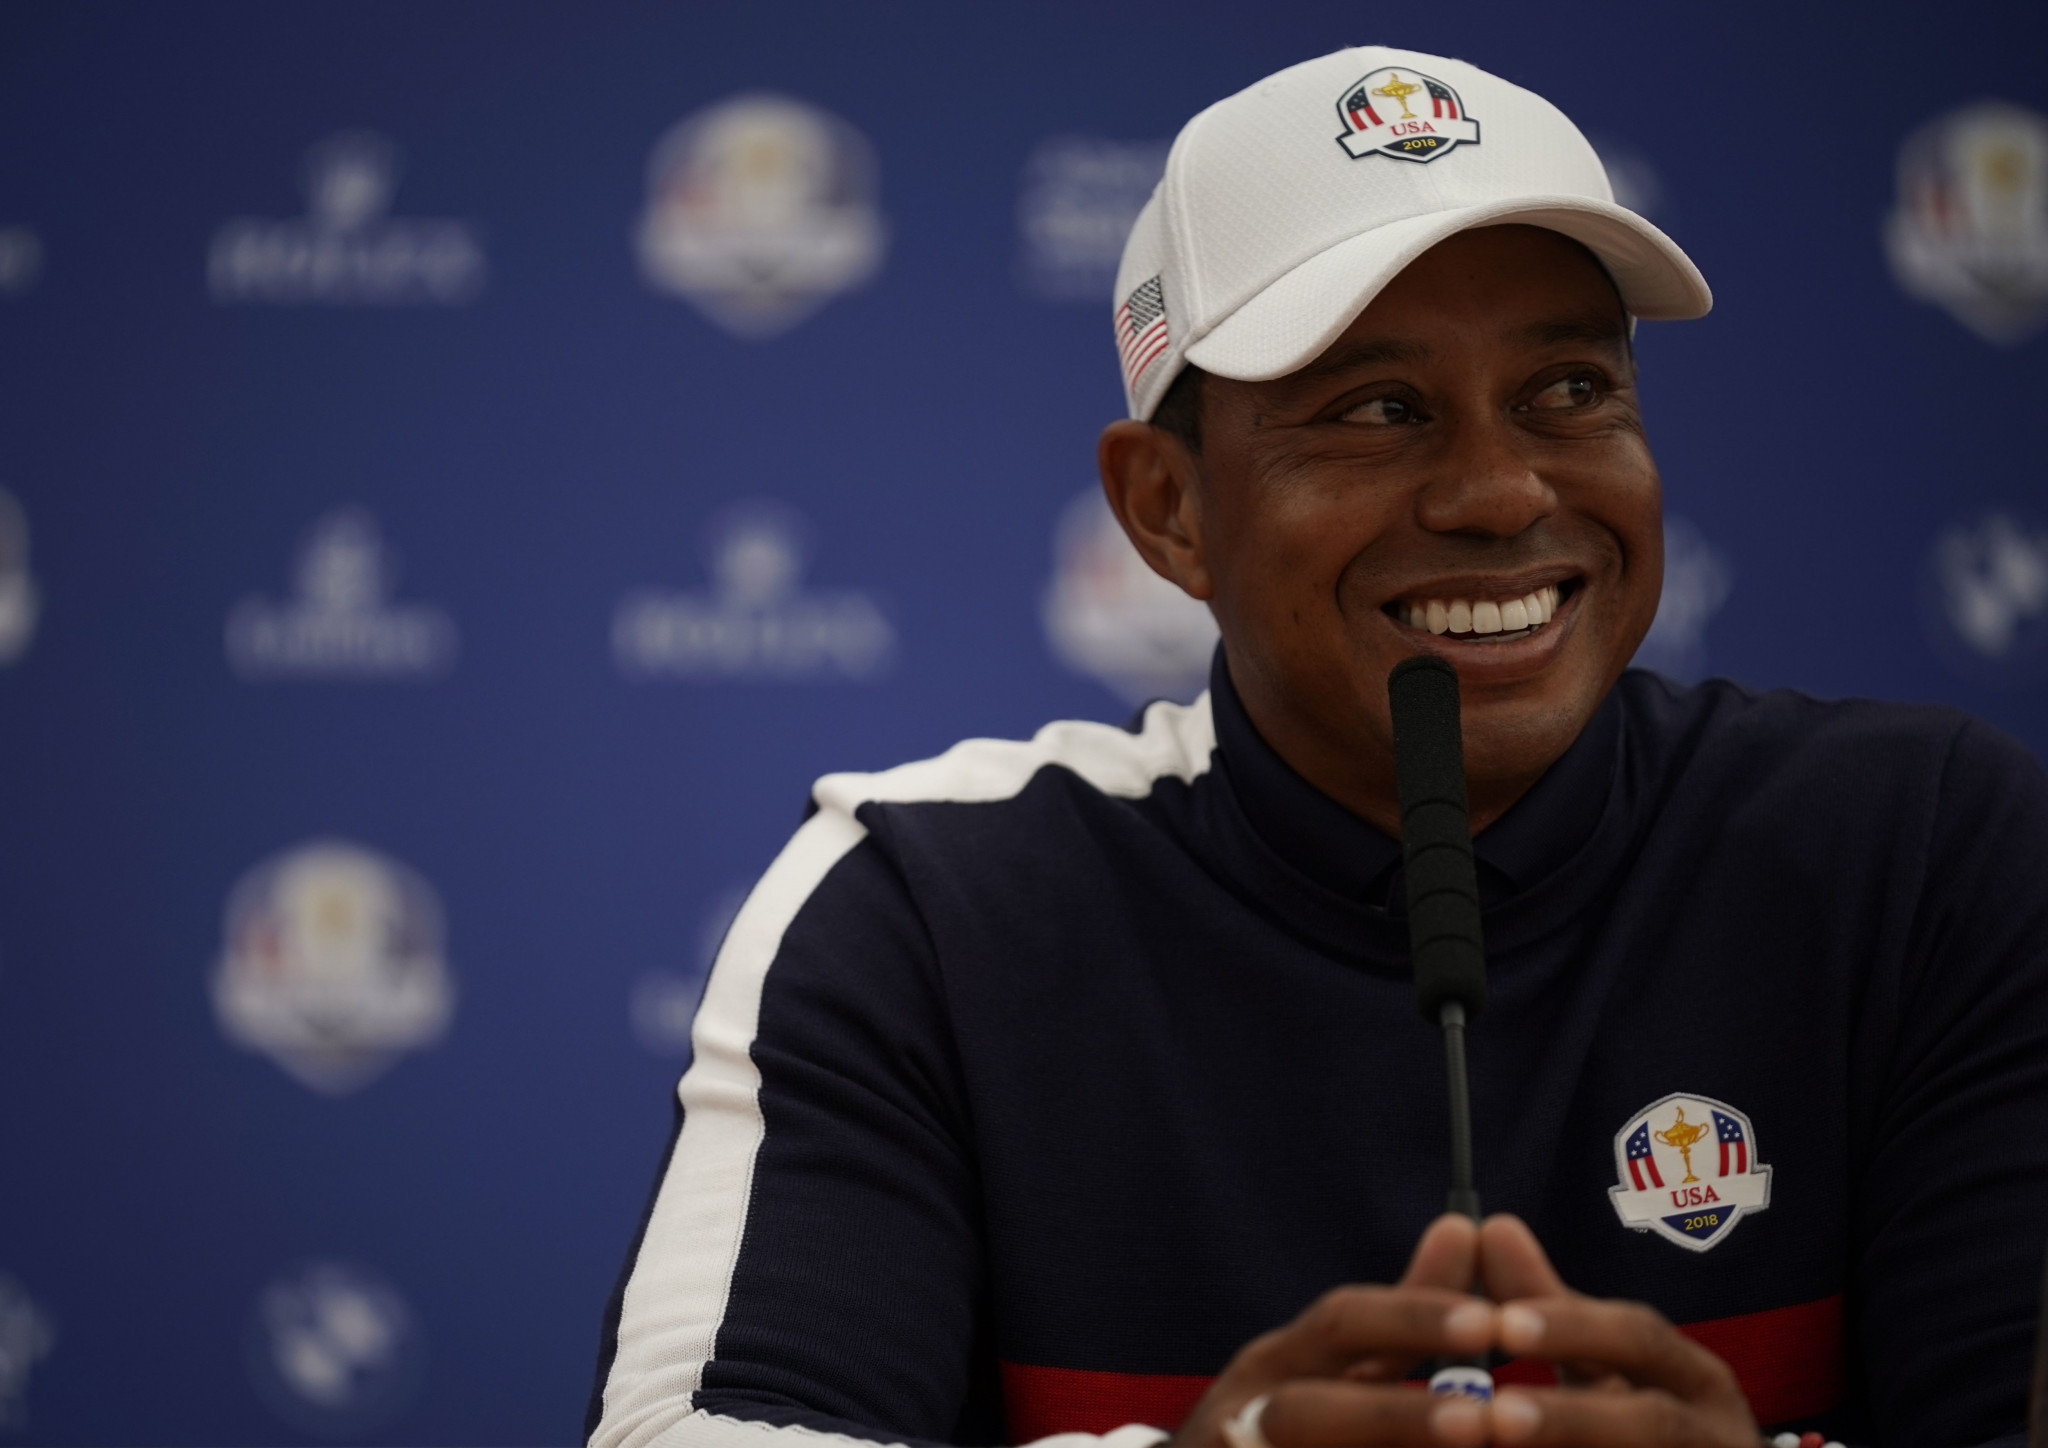 Tiger Woods could play a significant role for the US team at the Ryder Cup in Paris this week ©Getty Images